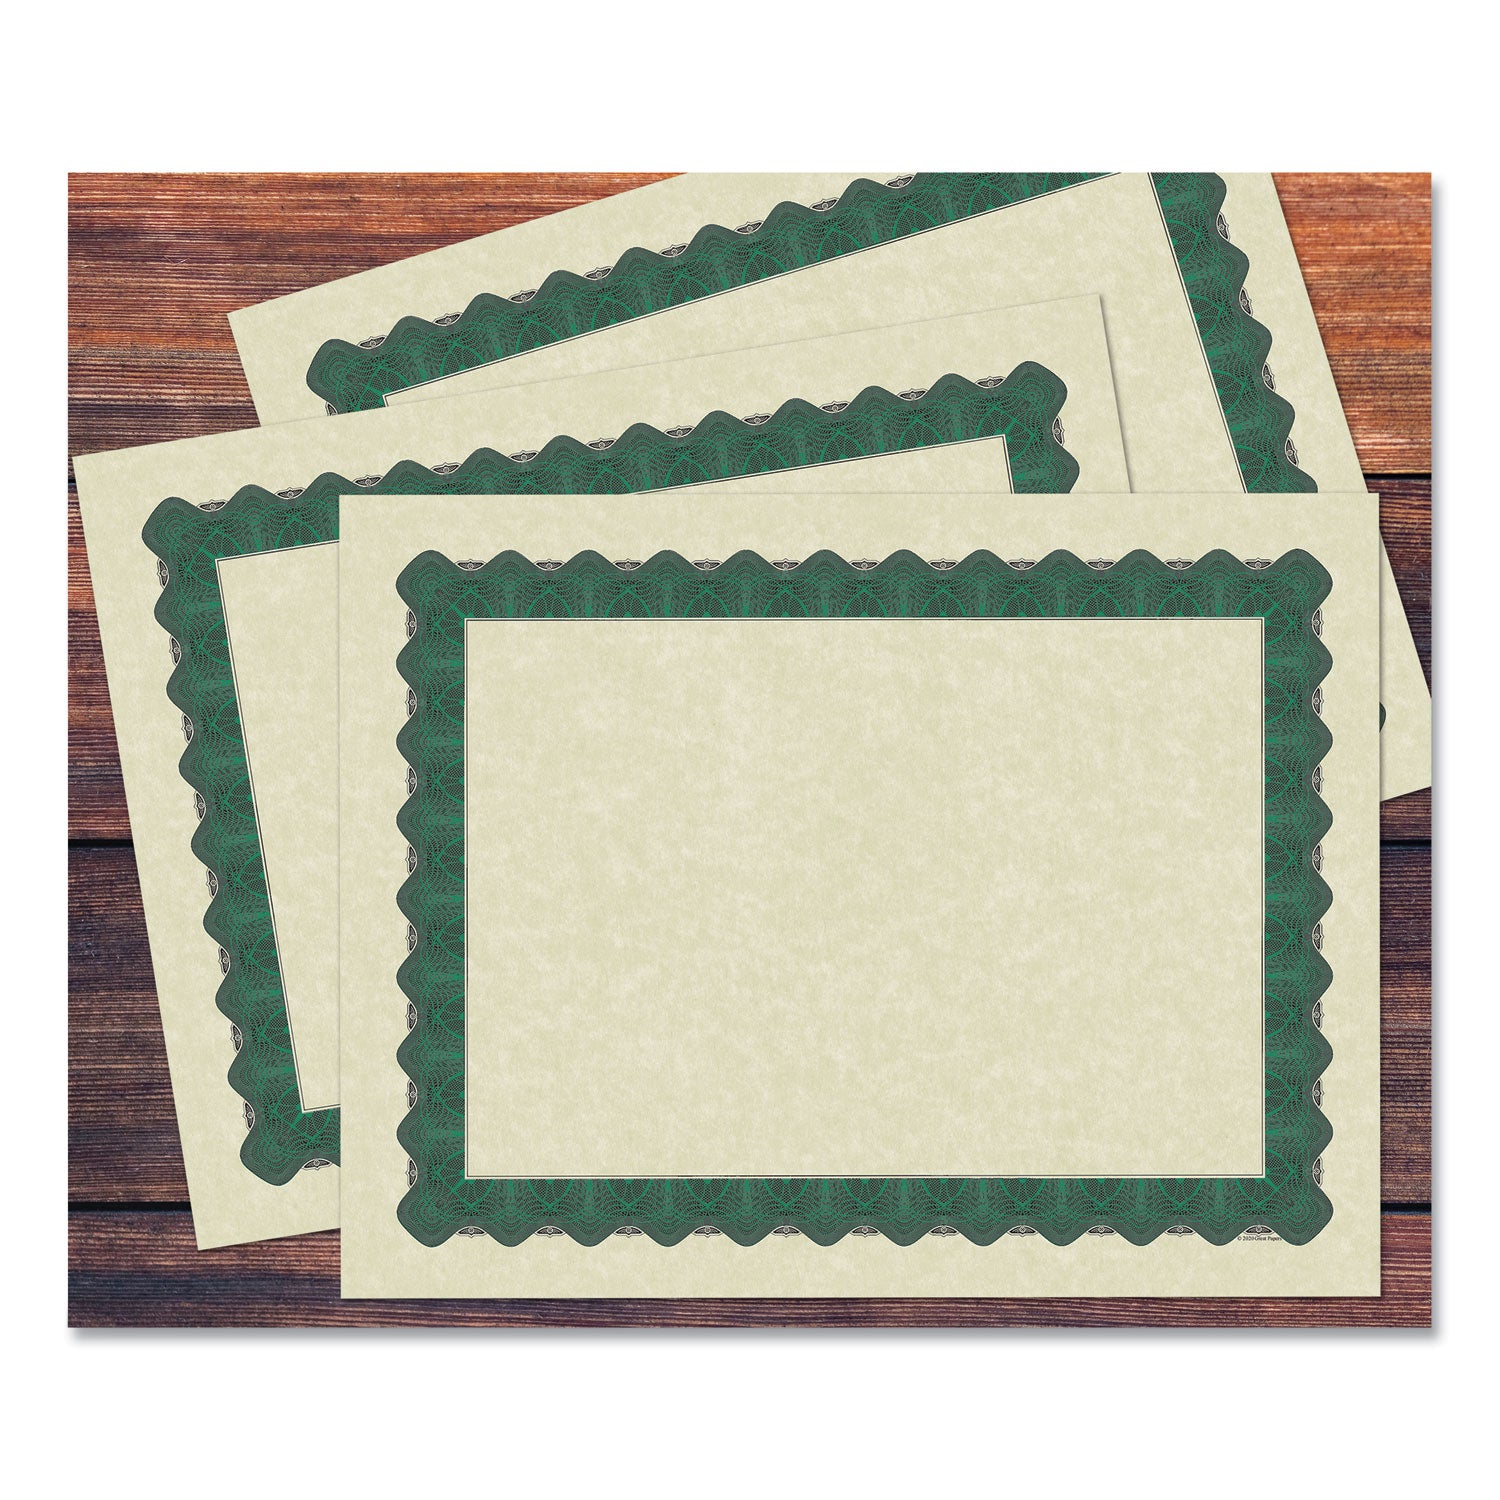 metallic-border-certificates-11-x-85-ivory-green-with-green-border-100-pack_grp934200 - 3